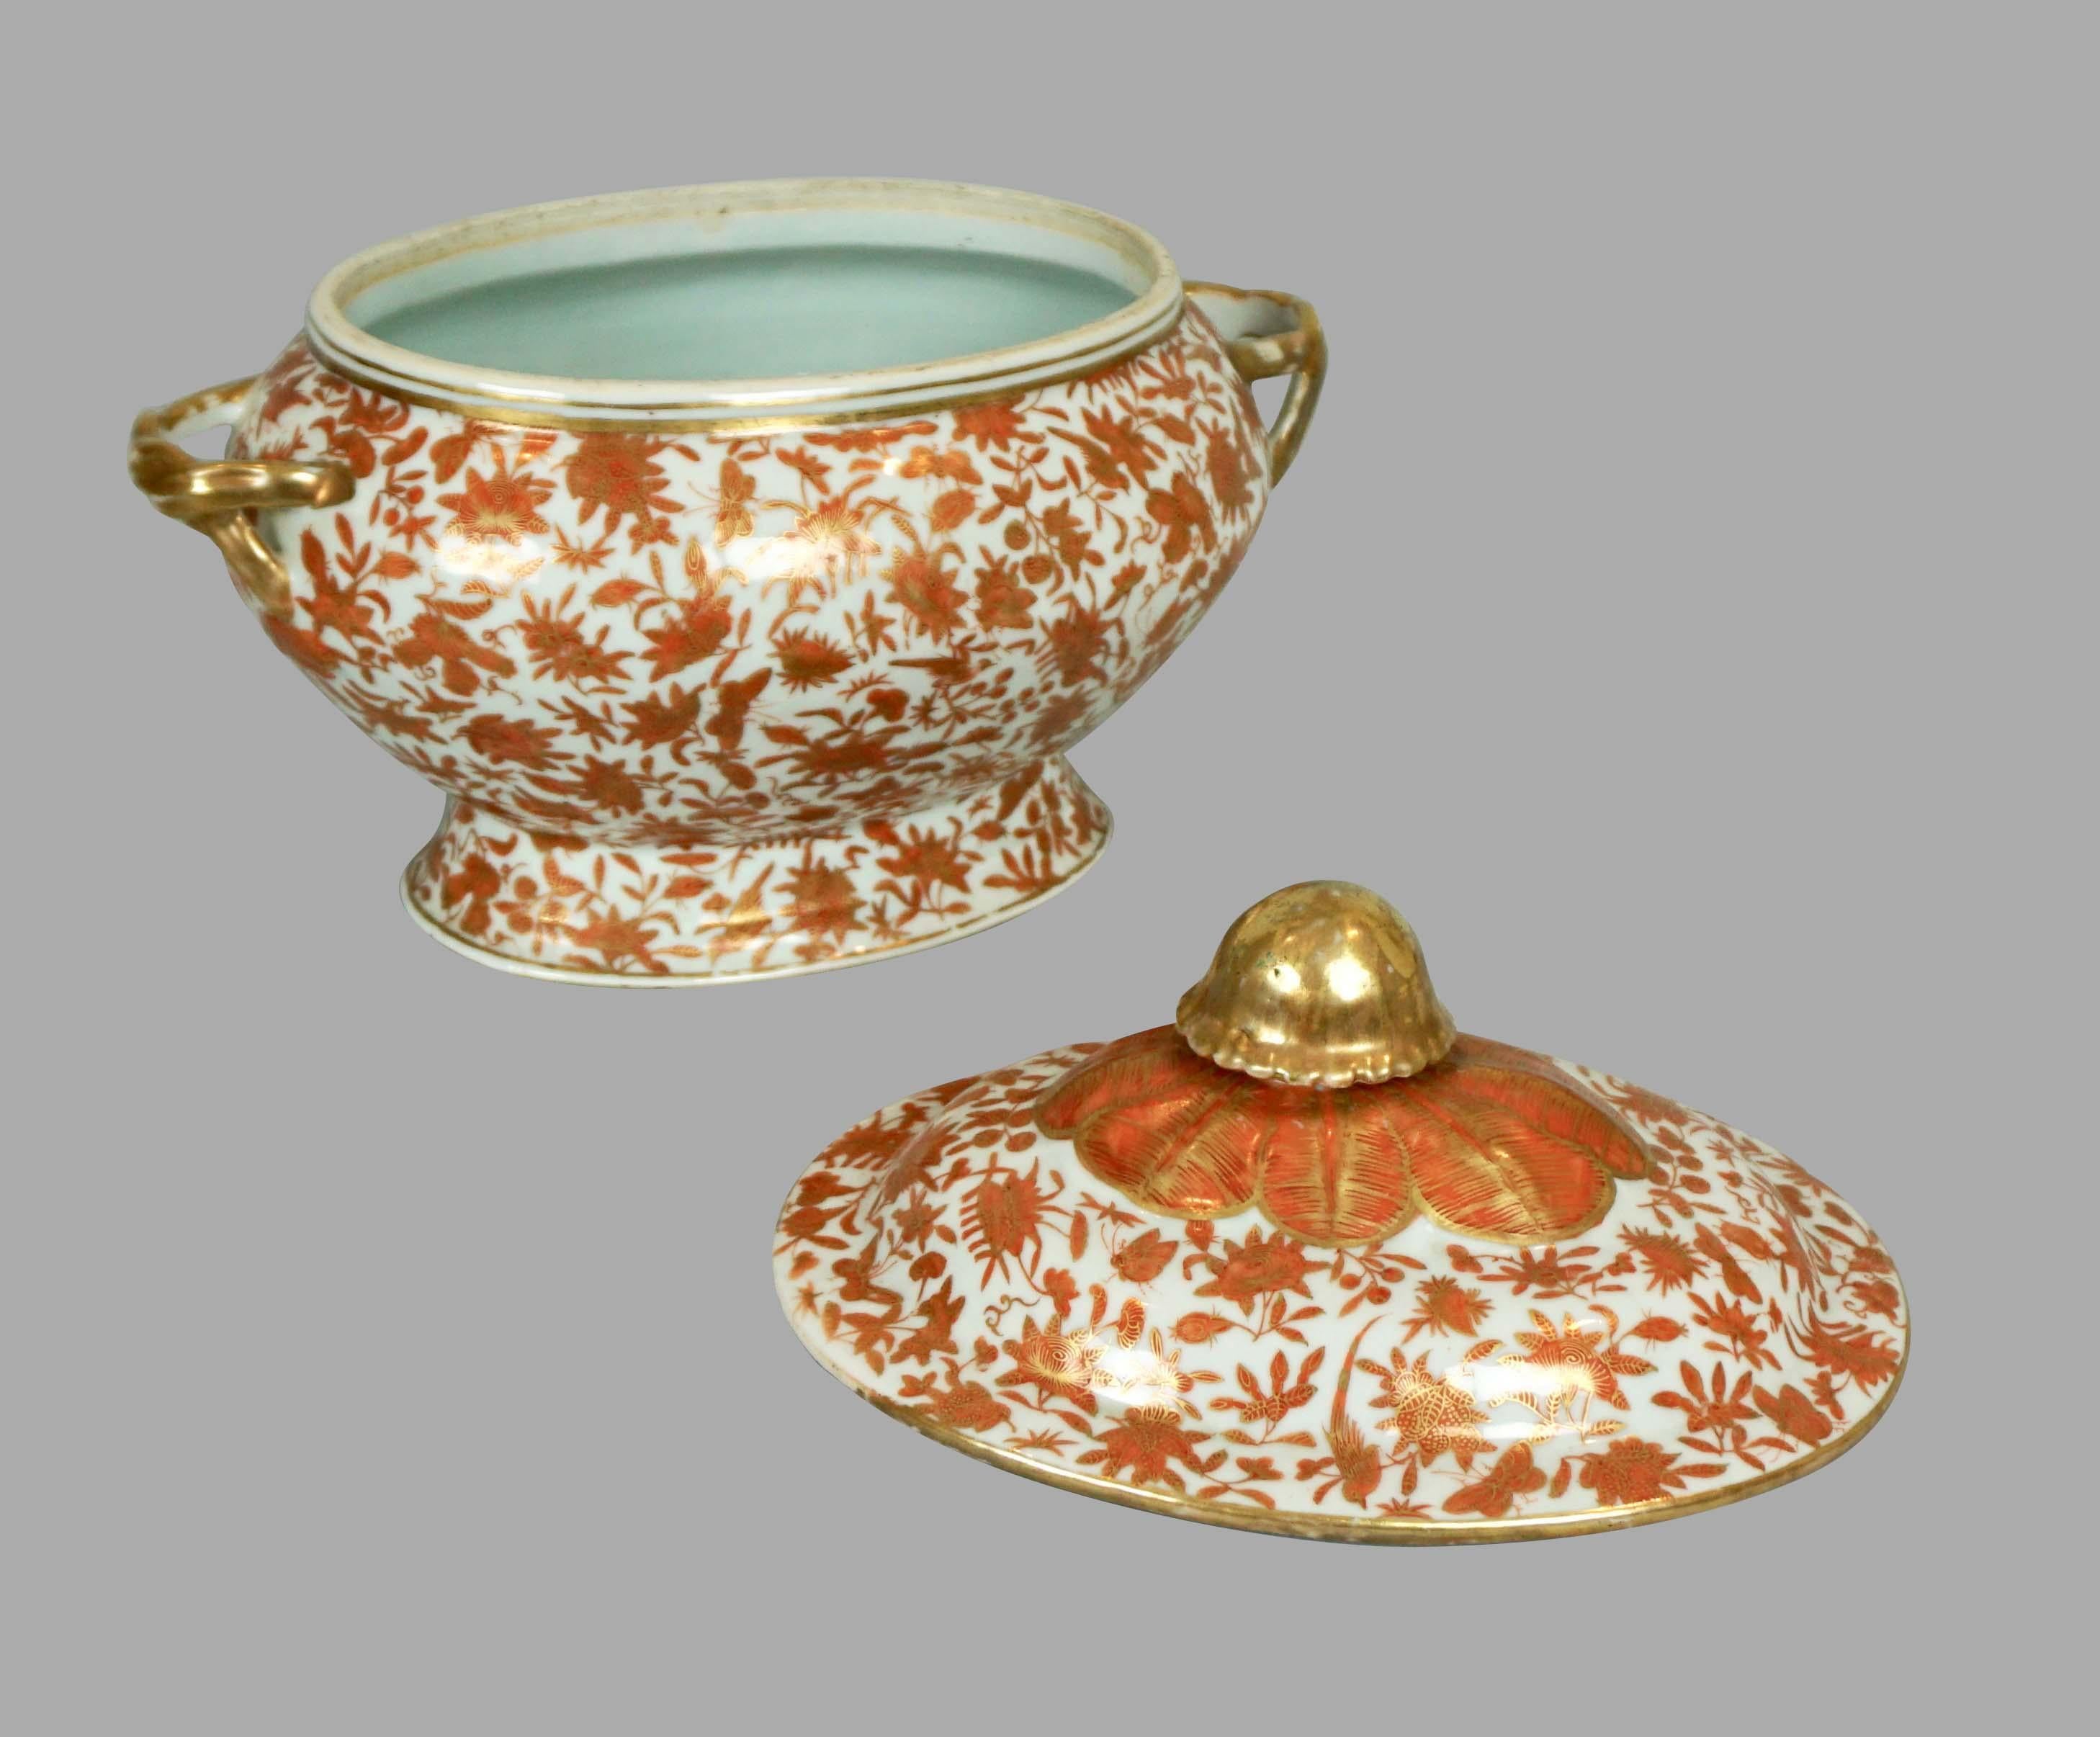 Mid-19th Century Chinese Export Sacred Bird and Butterfly Pattern Porcelain Covered Soup Tureen